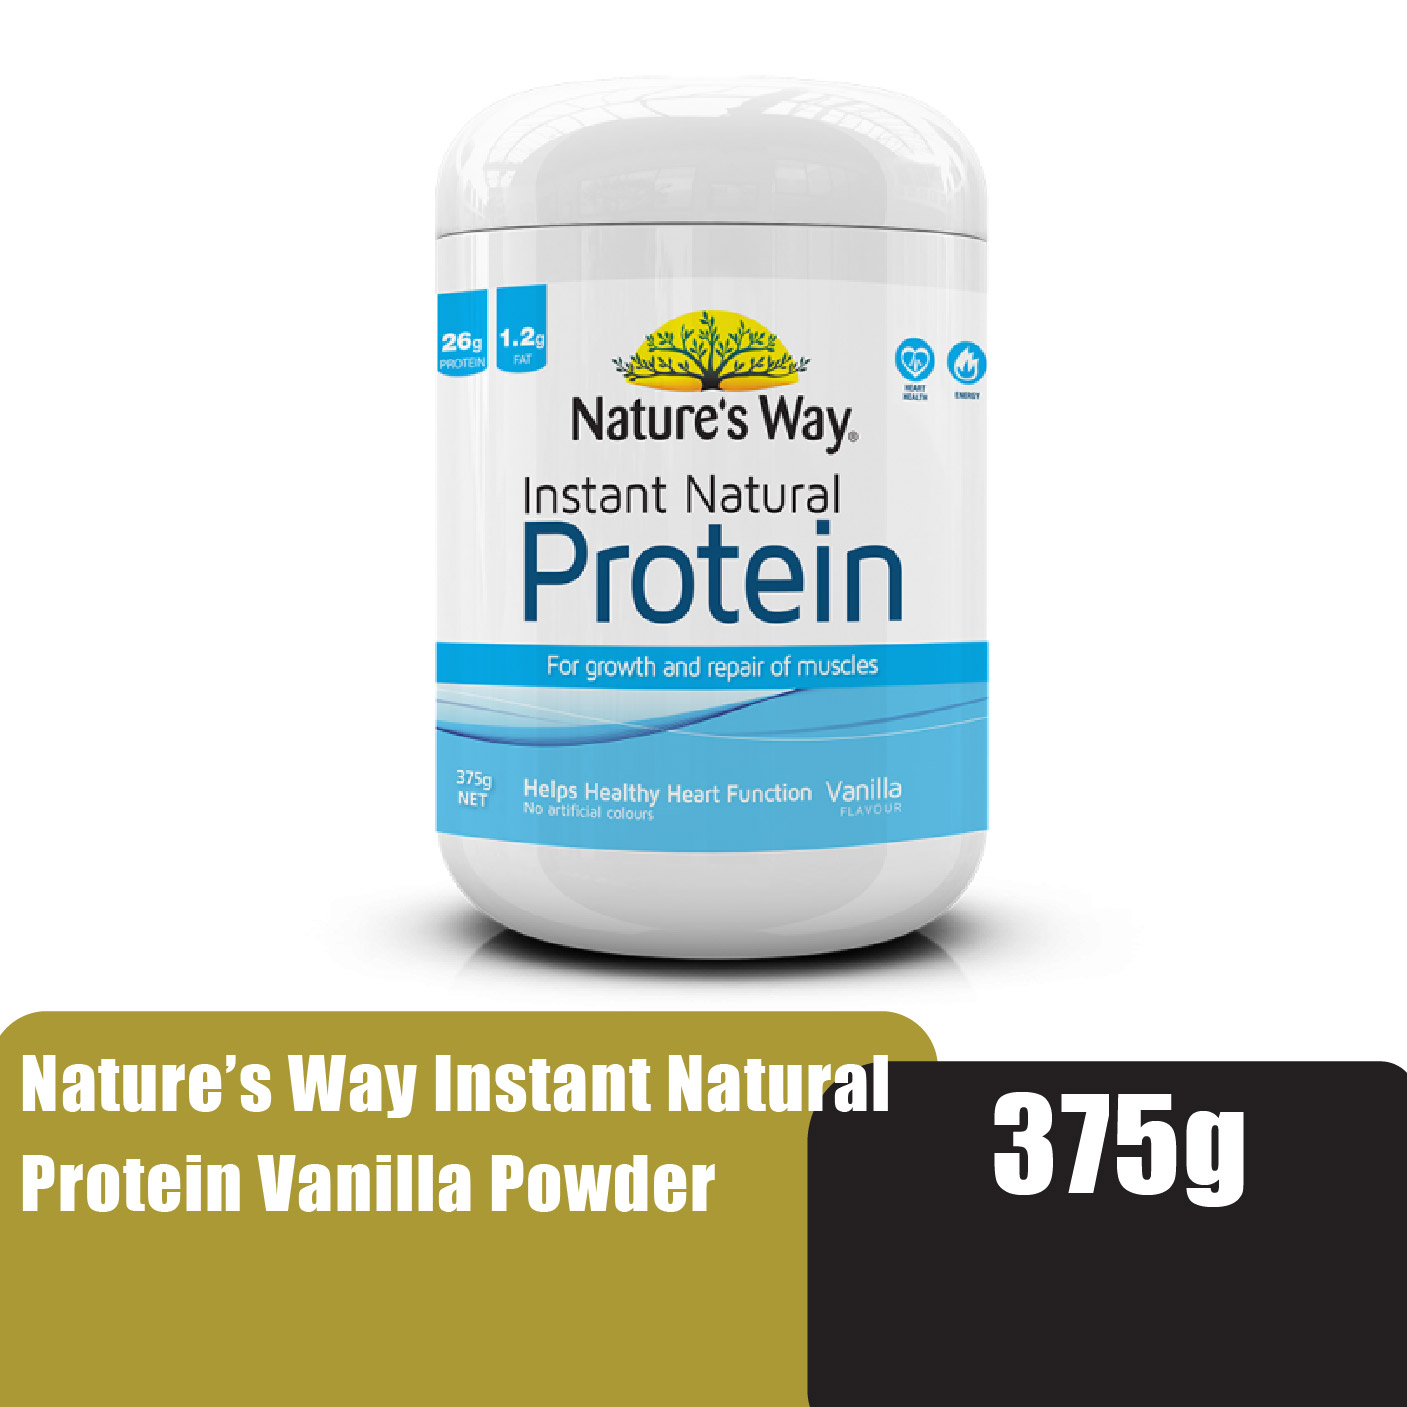 Nature's Way Daily Instant Protein Powder (Vanilla flavour)375g helps to reduce cholesterol -(Suitable for halal)